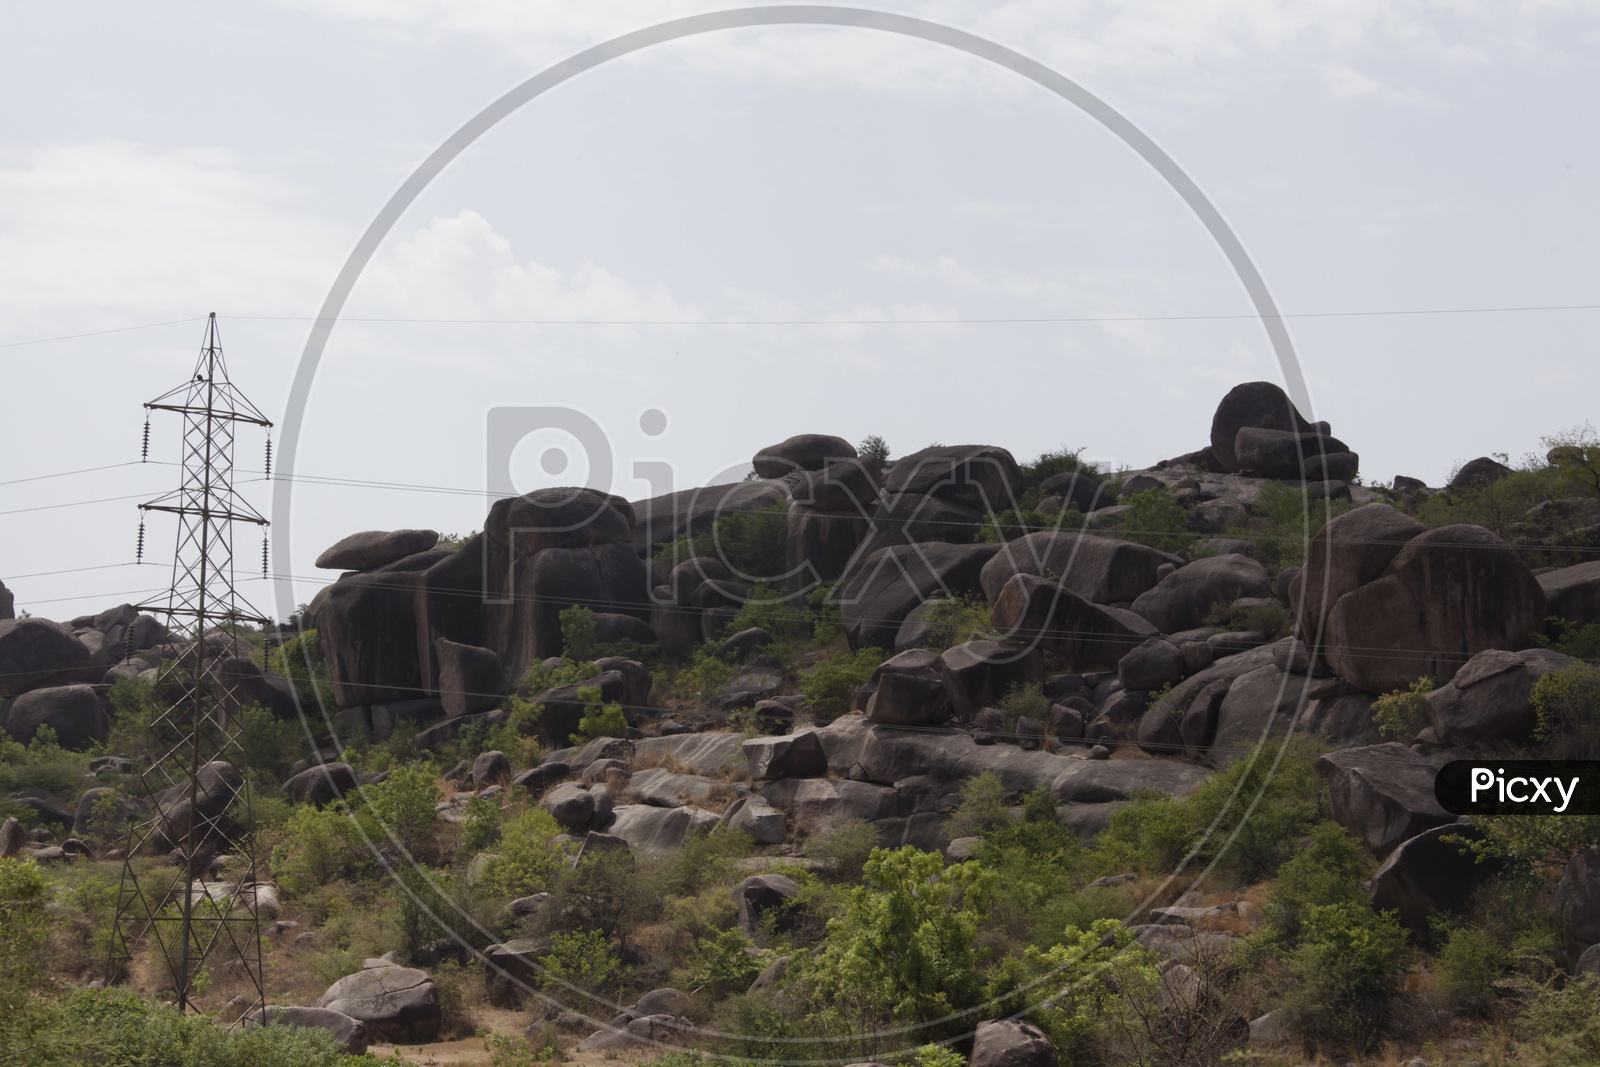 large rocks in a open area with electricity lines passing beside it